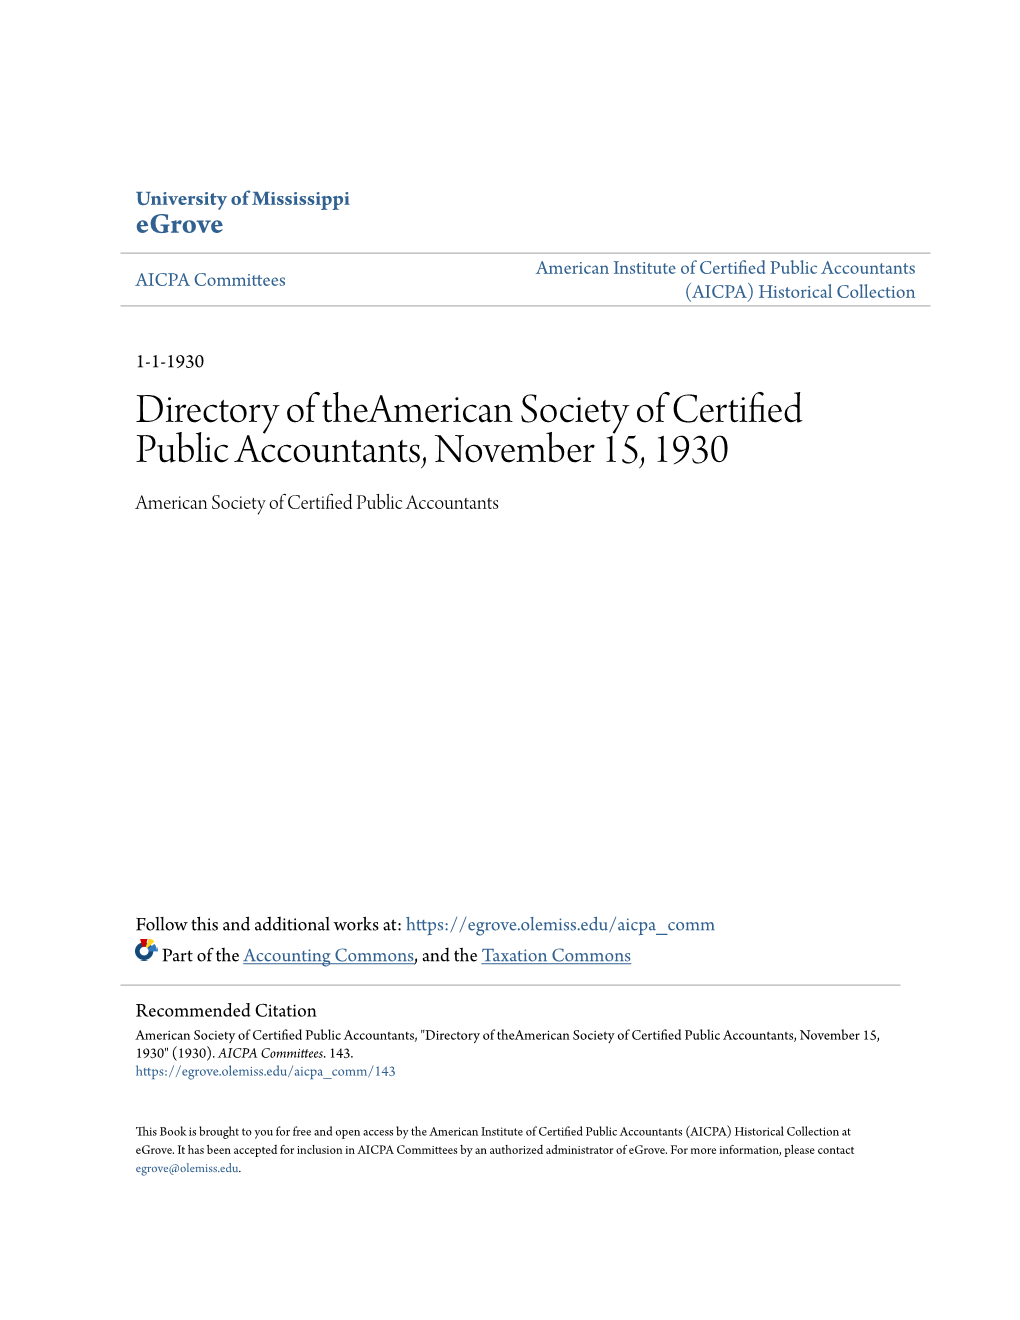 Directory of Theamerican Society of Certified Public Accountants, November 15, 1930 American Society of Certified Public Accountants